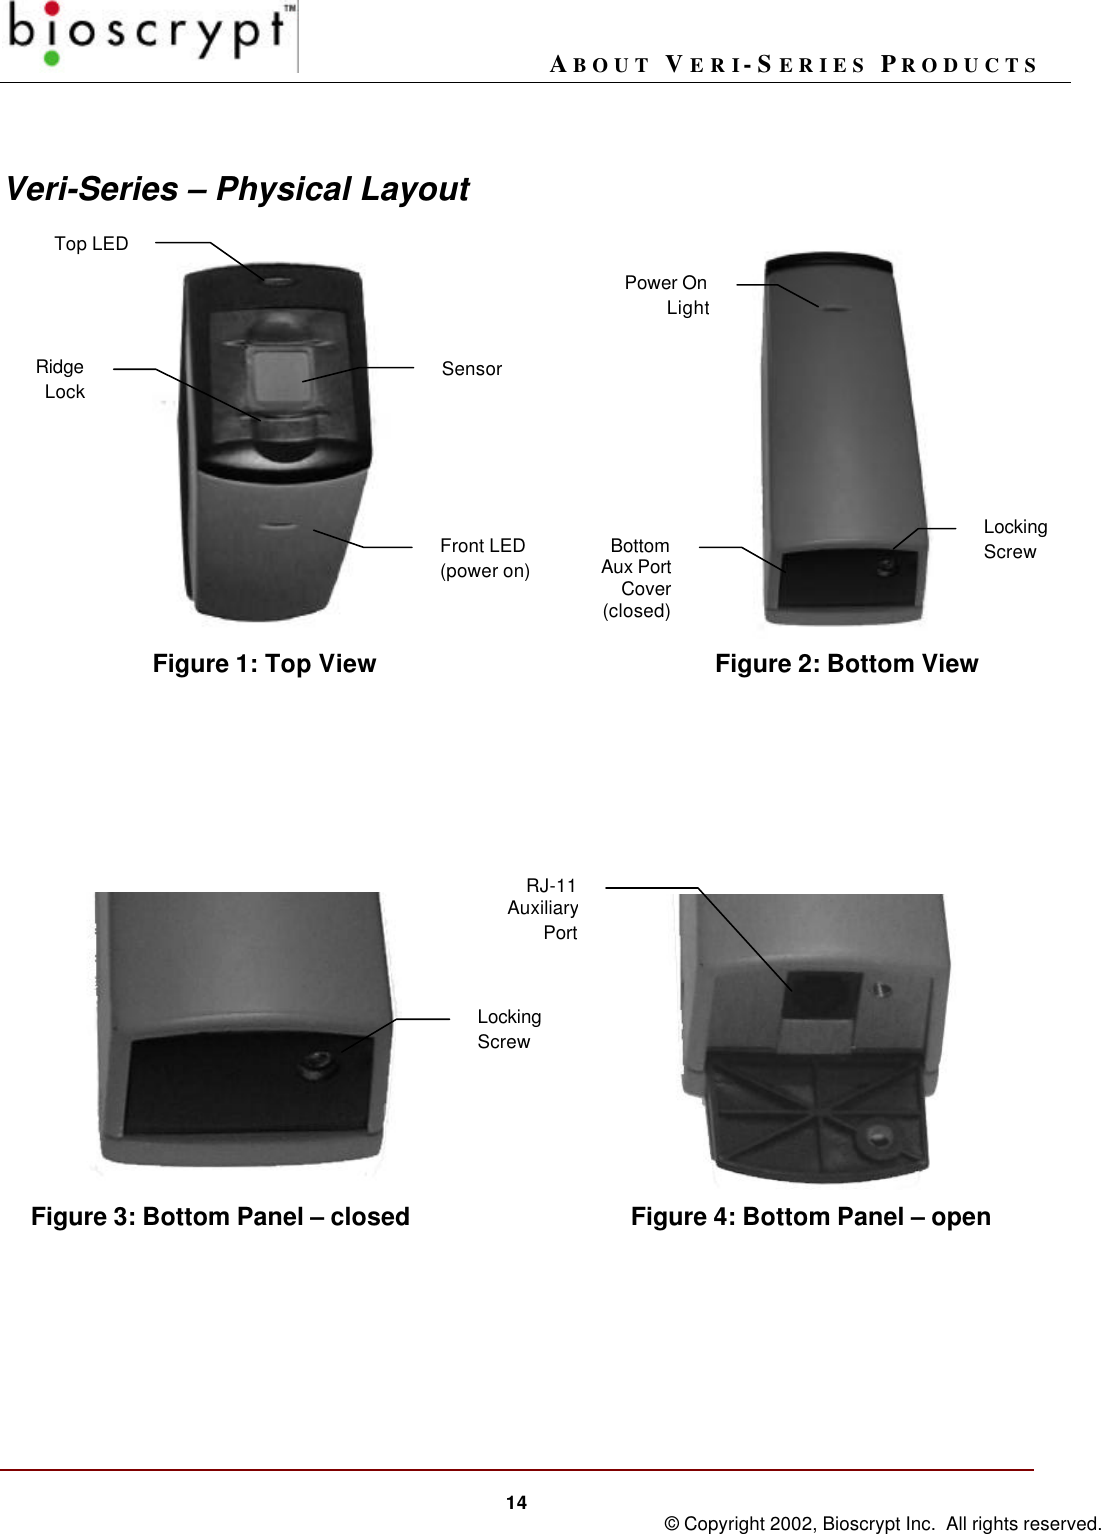 ABOUT VERI-SERIES PRODUCTS14 © Copyright 2002, Bioscrypt Inc.  All rights reserved.Veri-Series – Physical LayoutFigure 1: Top View  Figure 2: Bottom ViewFigure 3: Bottom Panel – closed Figure 4: Bottom Panel – openTop LEDFront LED(power on)SensorRidgeLockPower OnLightBottomAux PortCover(closed)LockingScrewLockingScrewRJ-11AuxiliaryPort